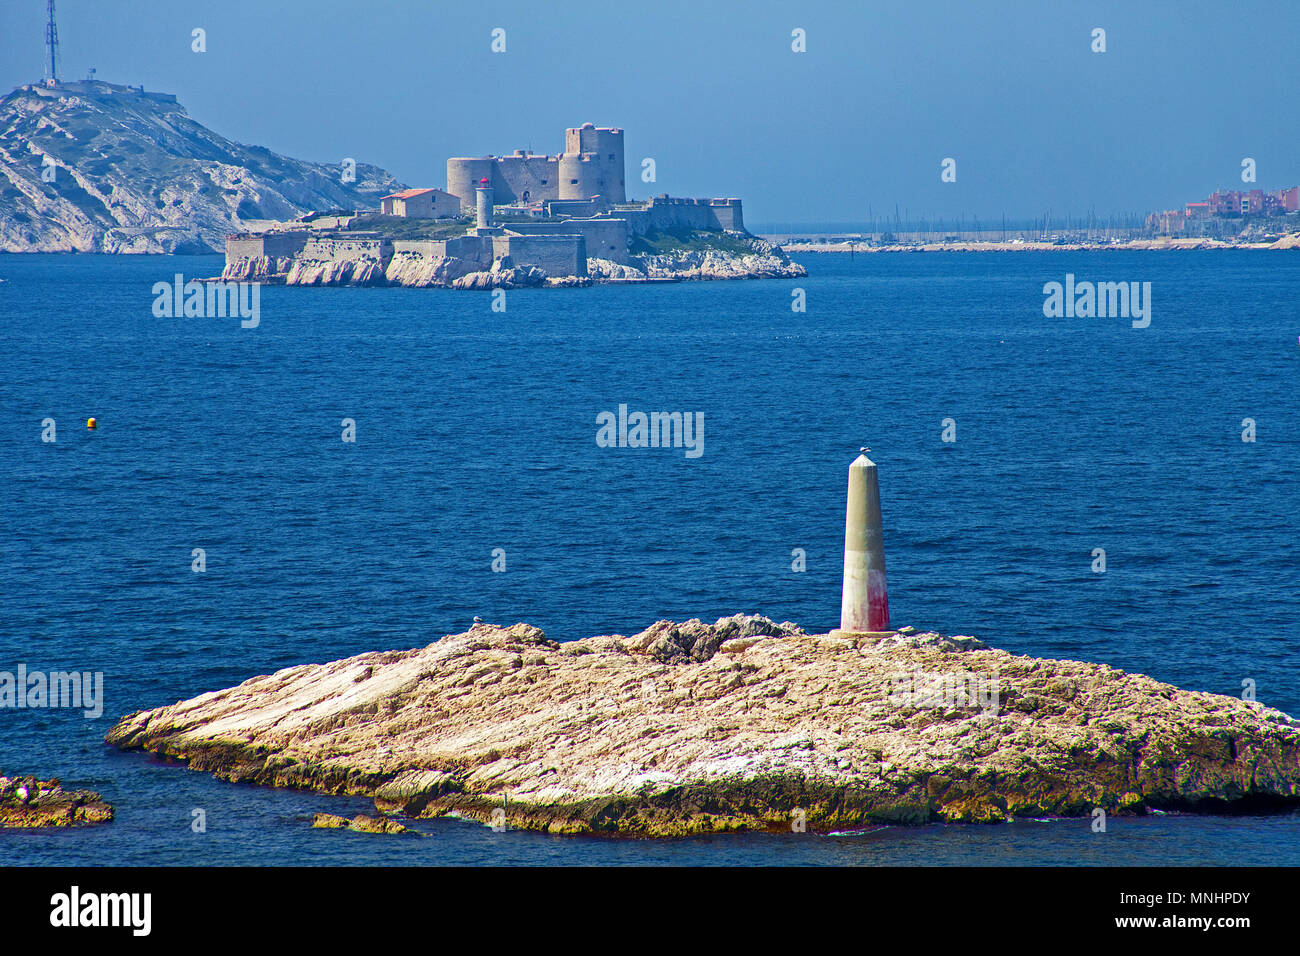 Chateau d'If on Île d’If, former prison island close to Marseille, Bouches-du-Rhone, Provence-Alpes-Côte d’Azur, South France, France, Europe Stock Photo